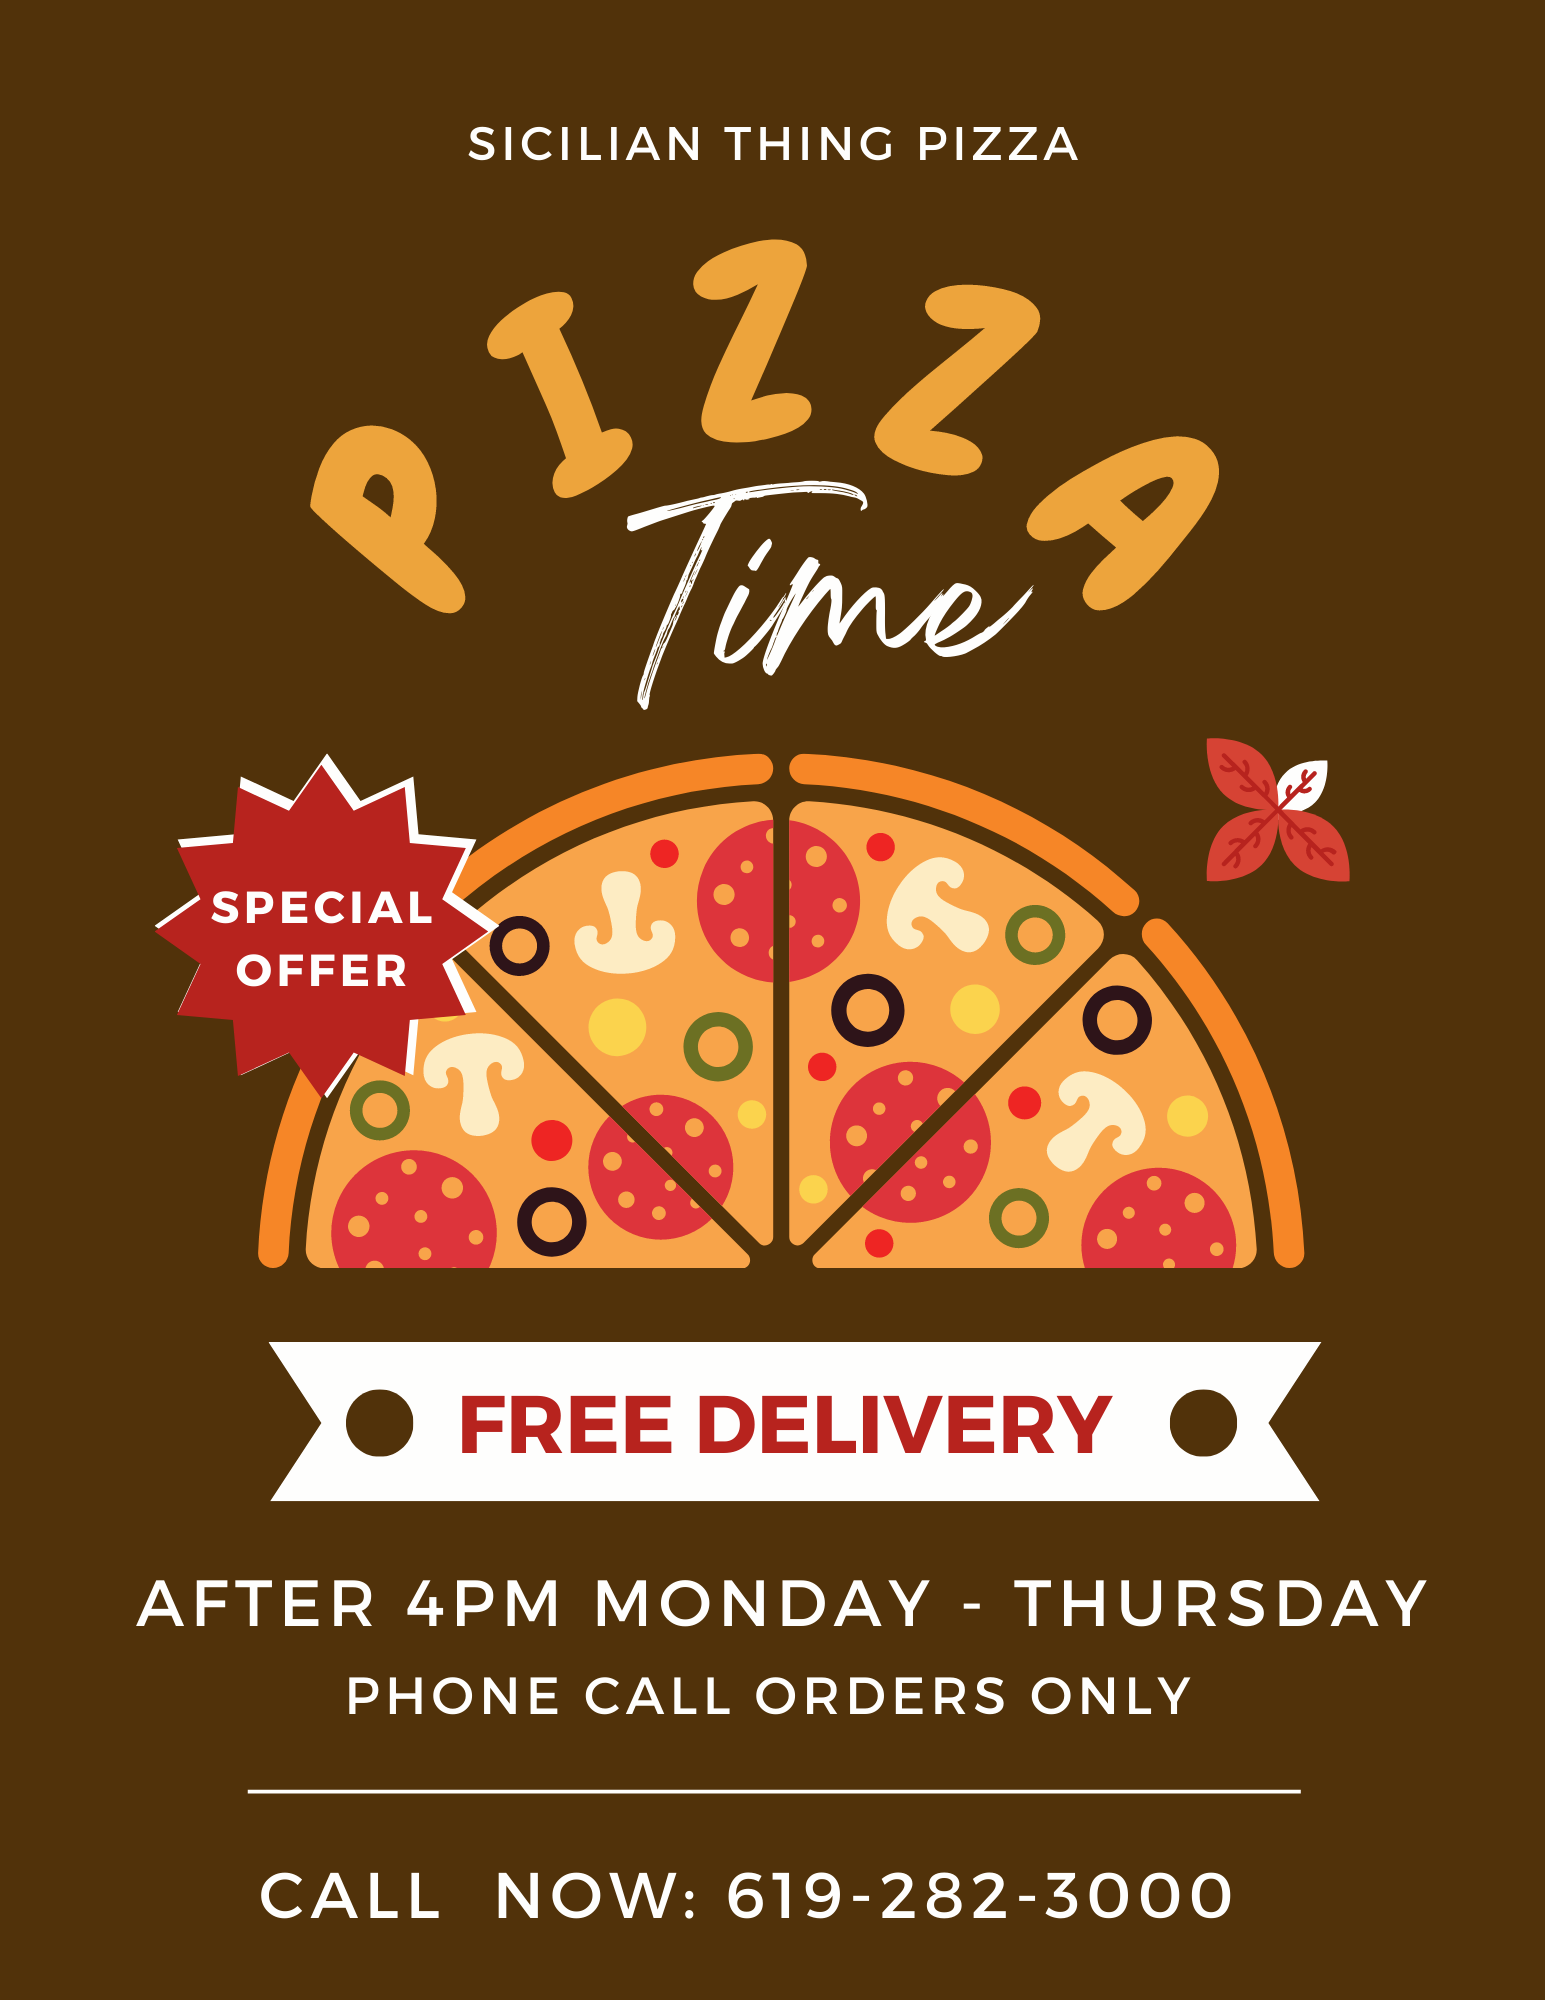 Delivery Special: free delivery after 4pm Monday through Friday